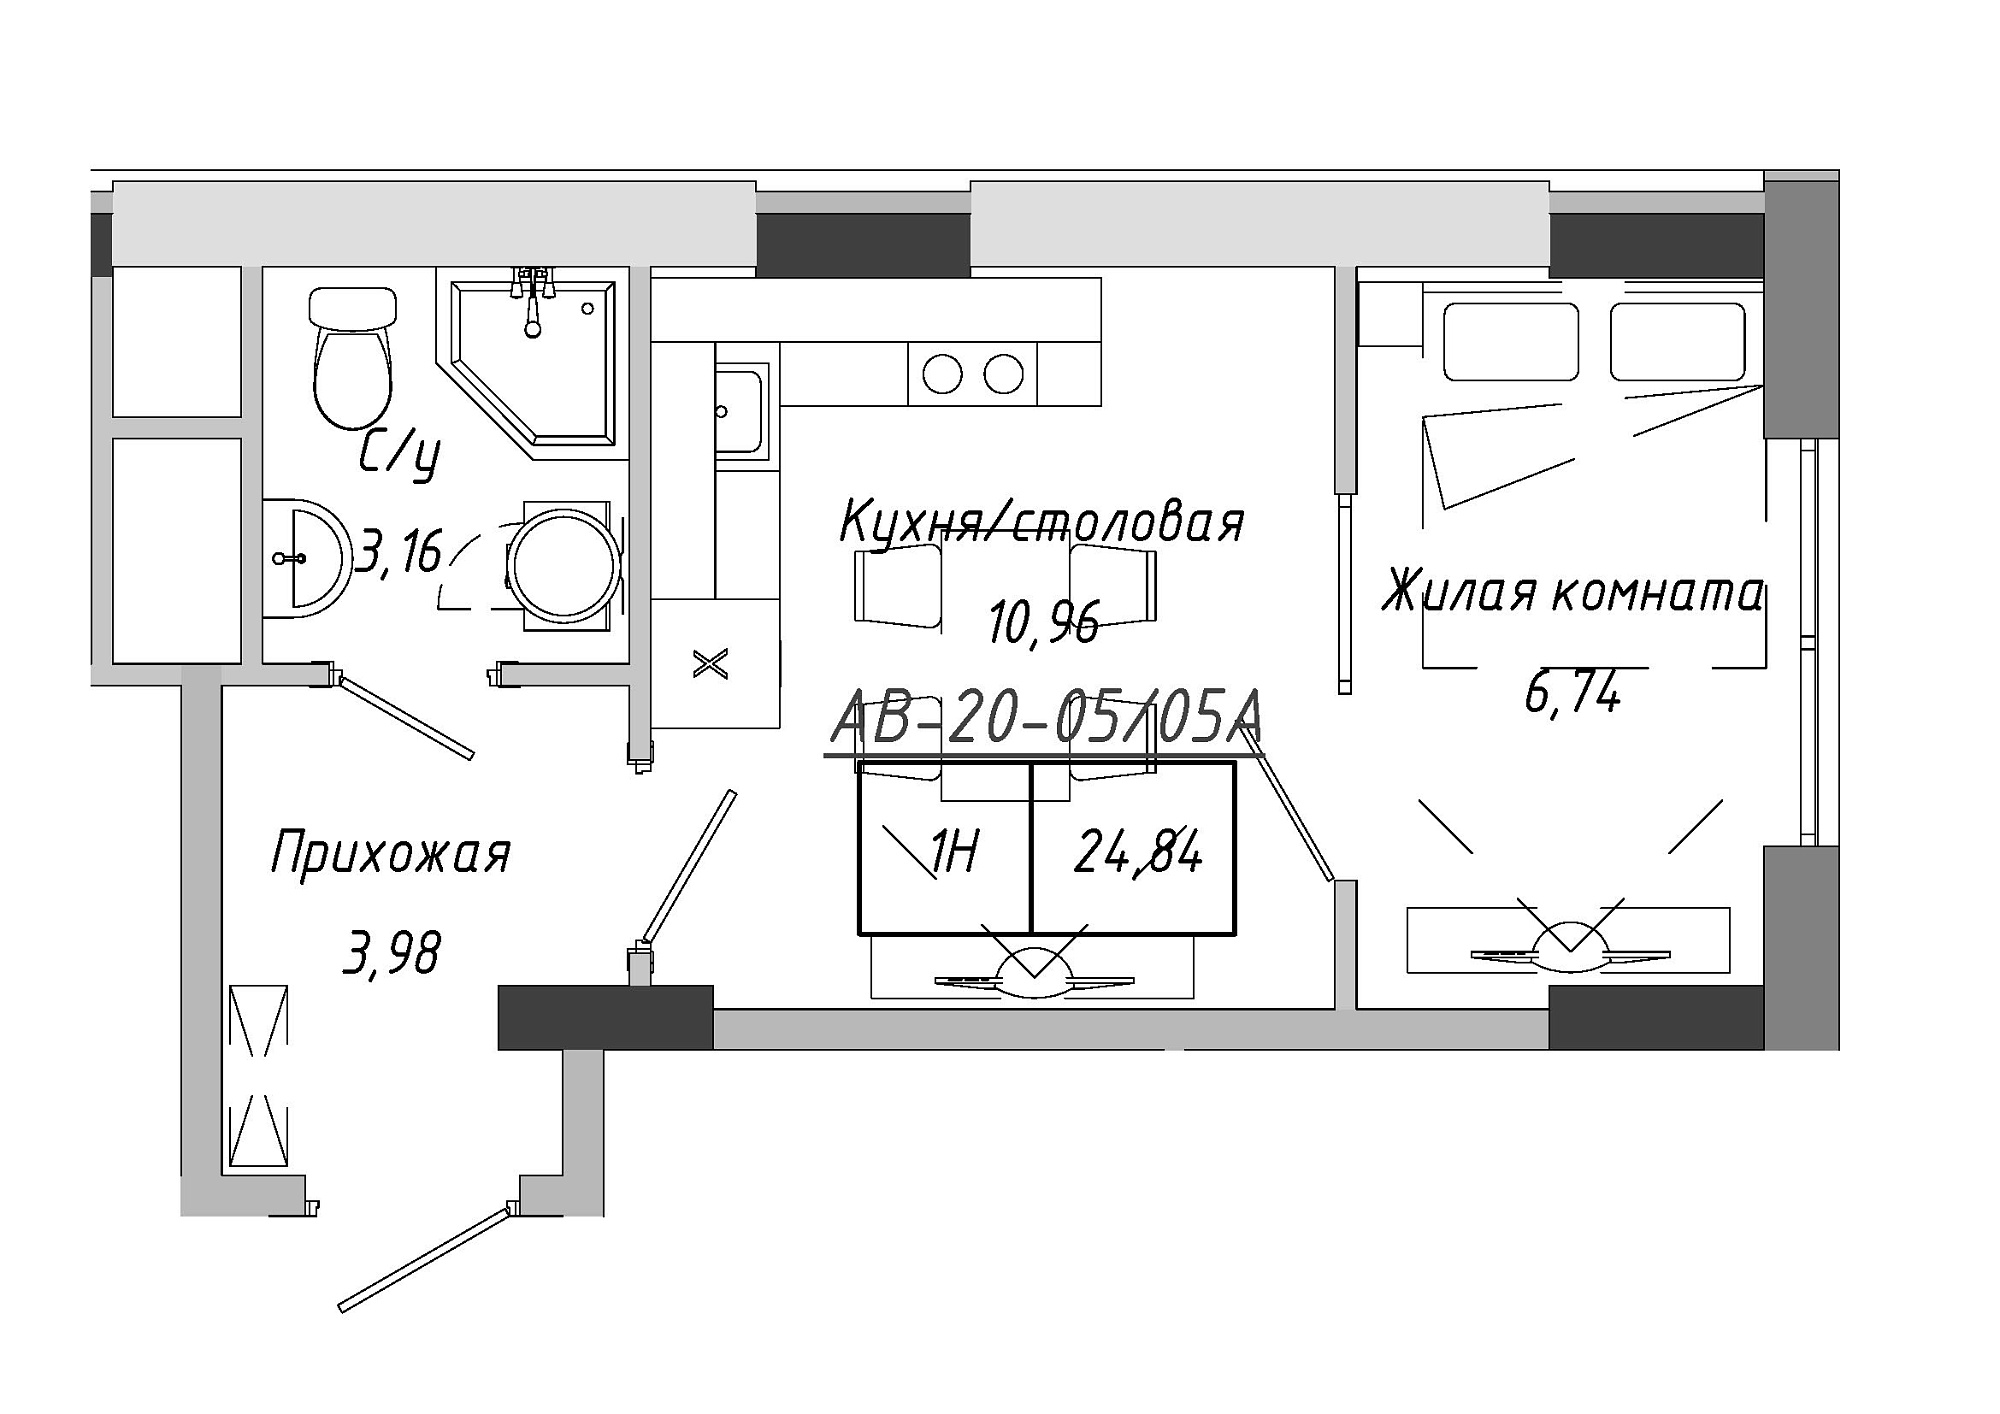 Planning 1-rm flats area 24.41m2, AB-20-05/0005а.